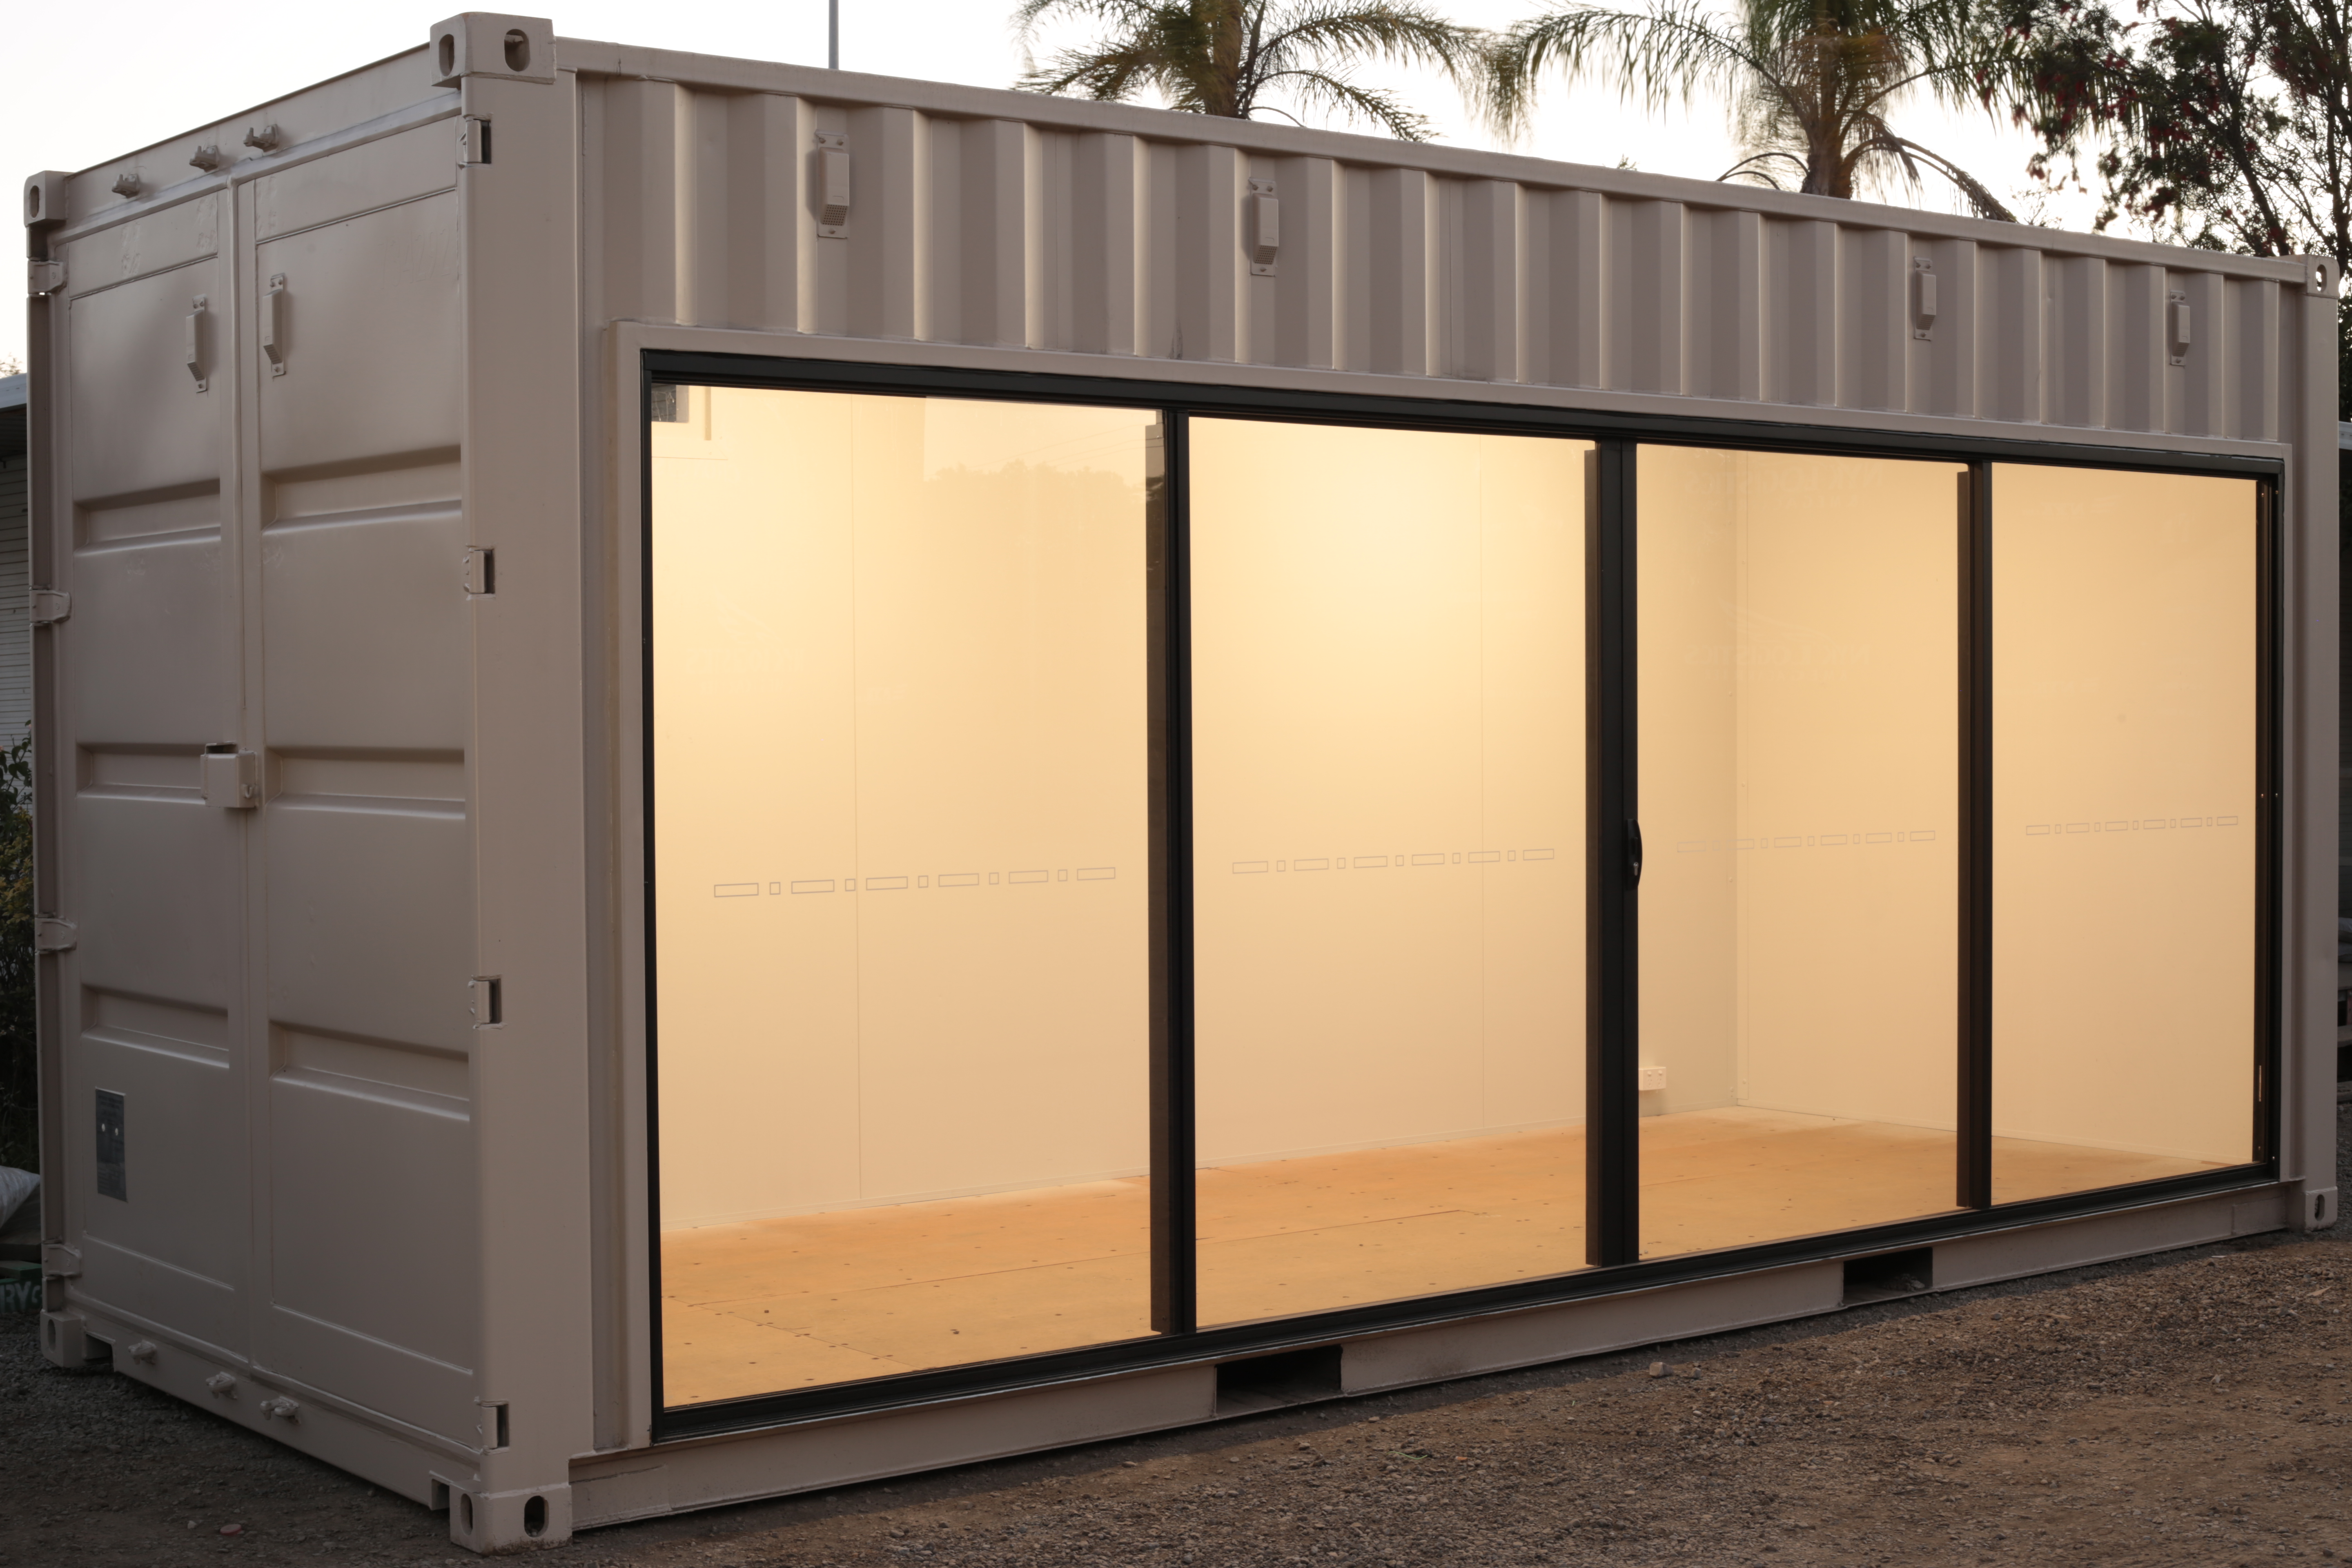 A cream 20ft shipping container with a glass sliding door the lengh of one side. There is warm light emanating from the interior.